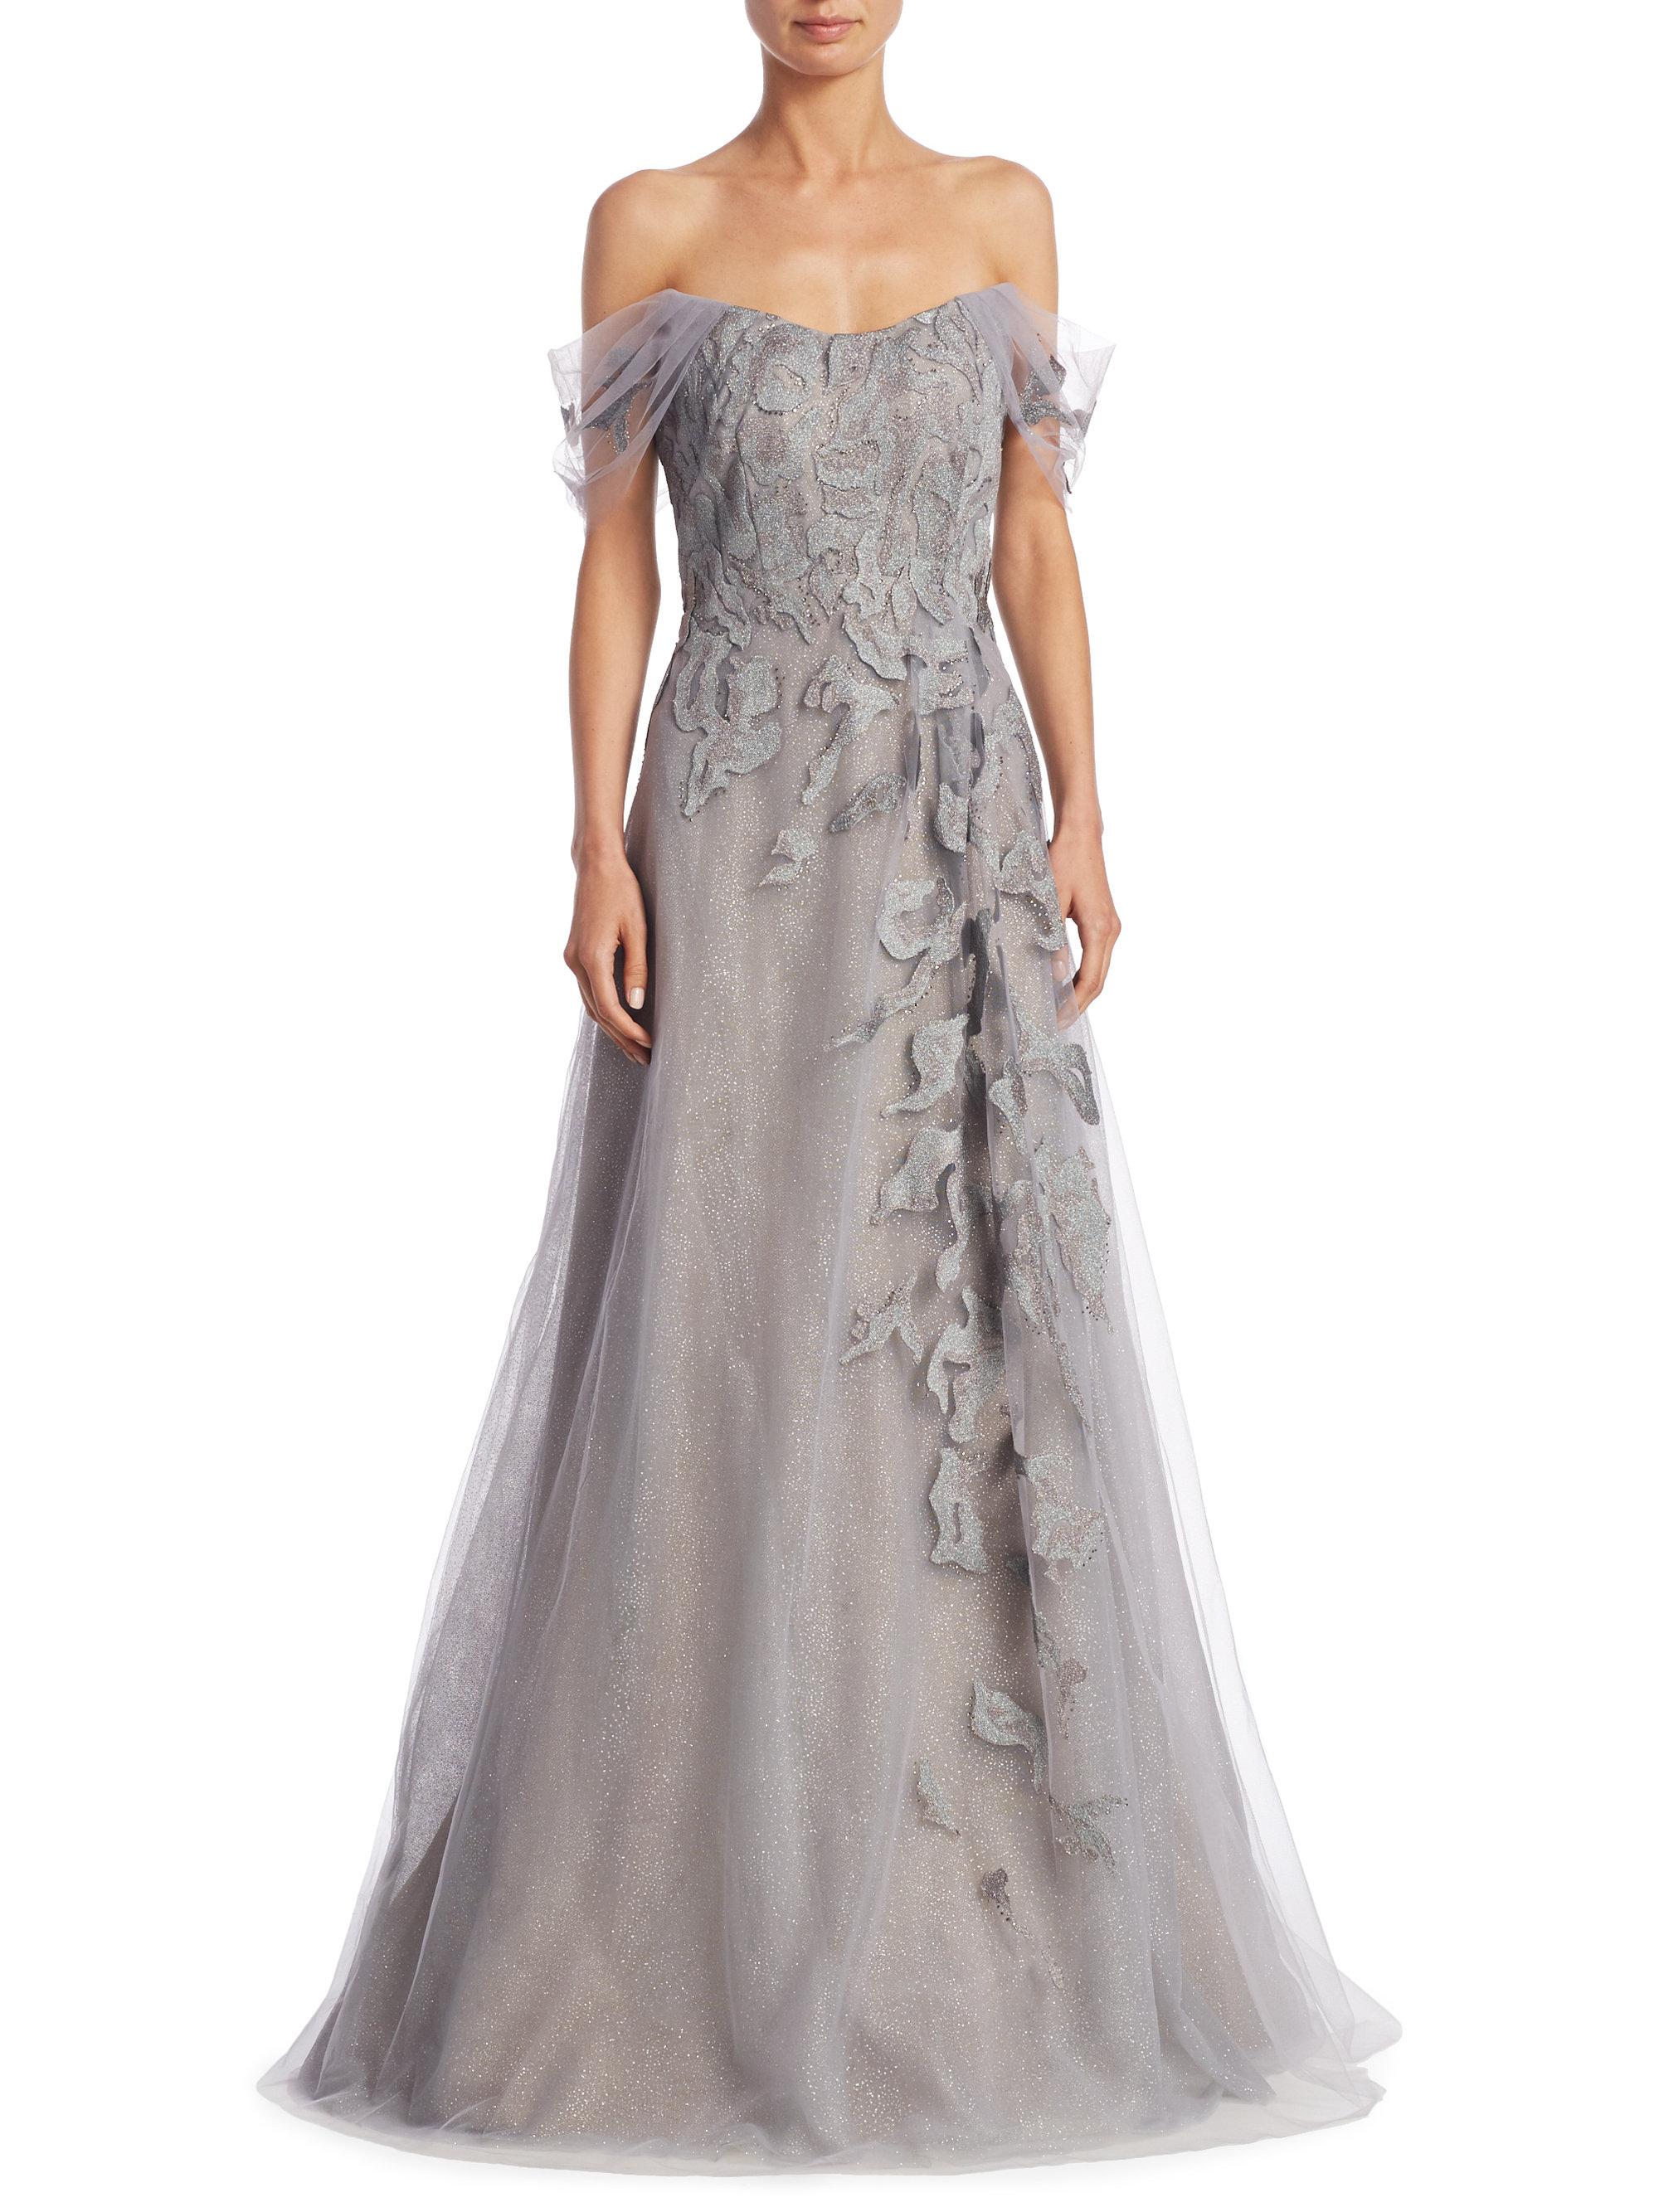 Lyst - Rene ruiz Off-the-shoulder Full Length A-line Gown in Gray